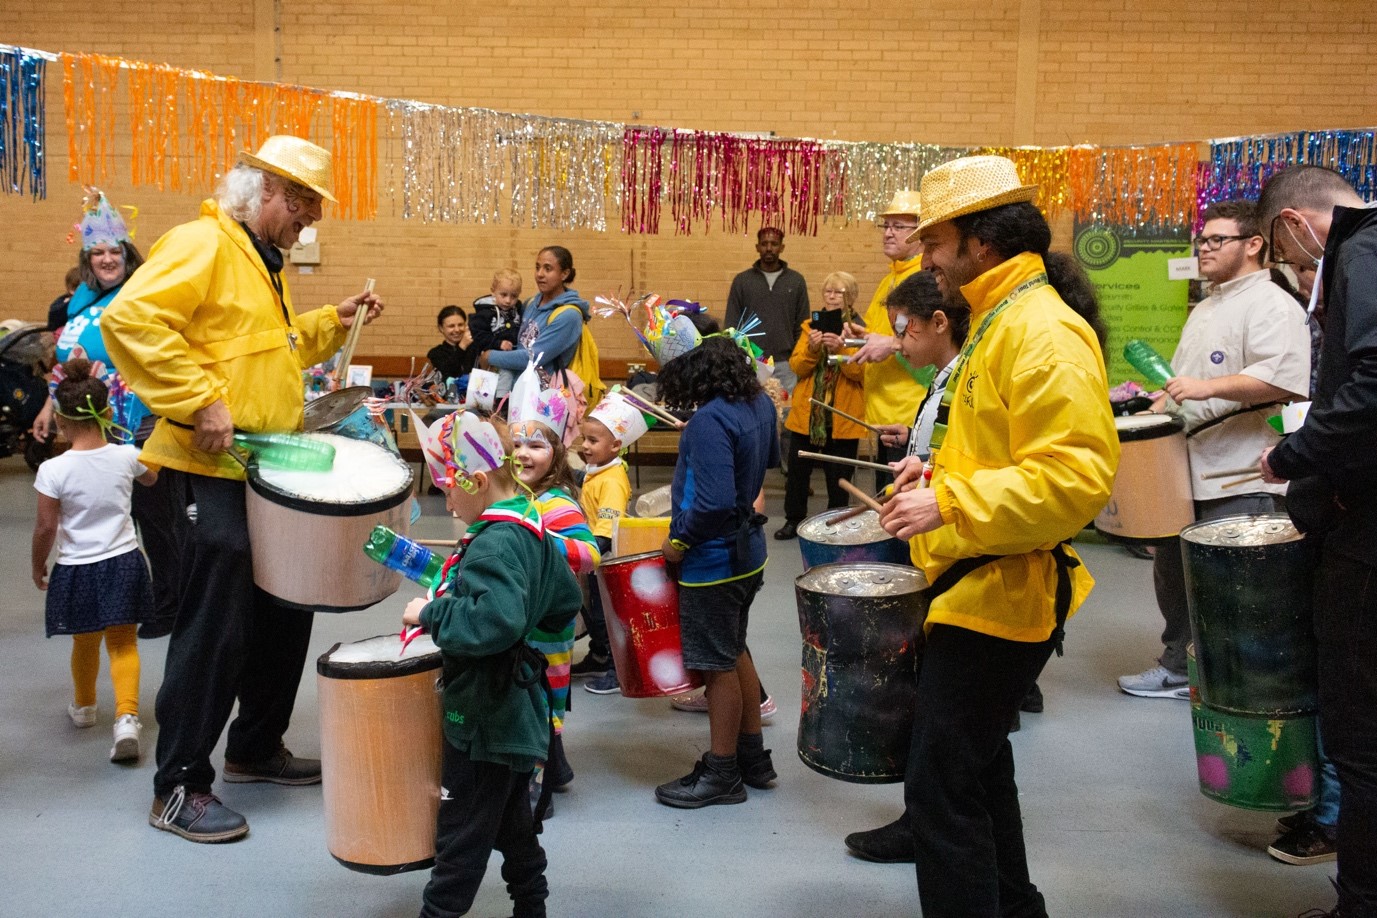 A group of adults and children playing drums in a lively community centre.